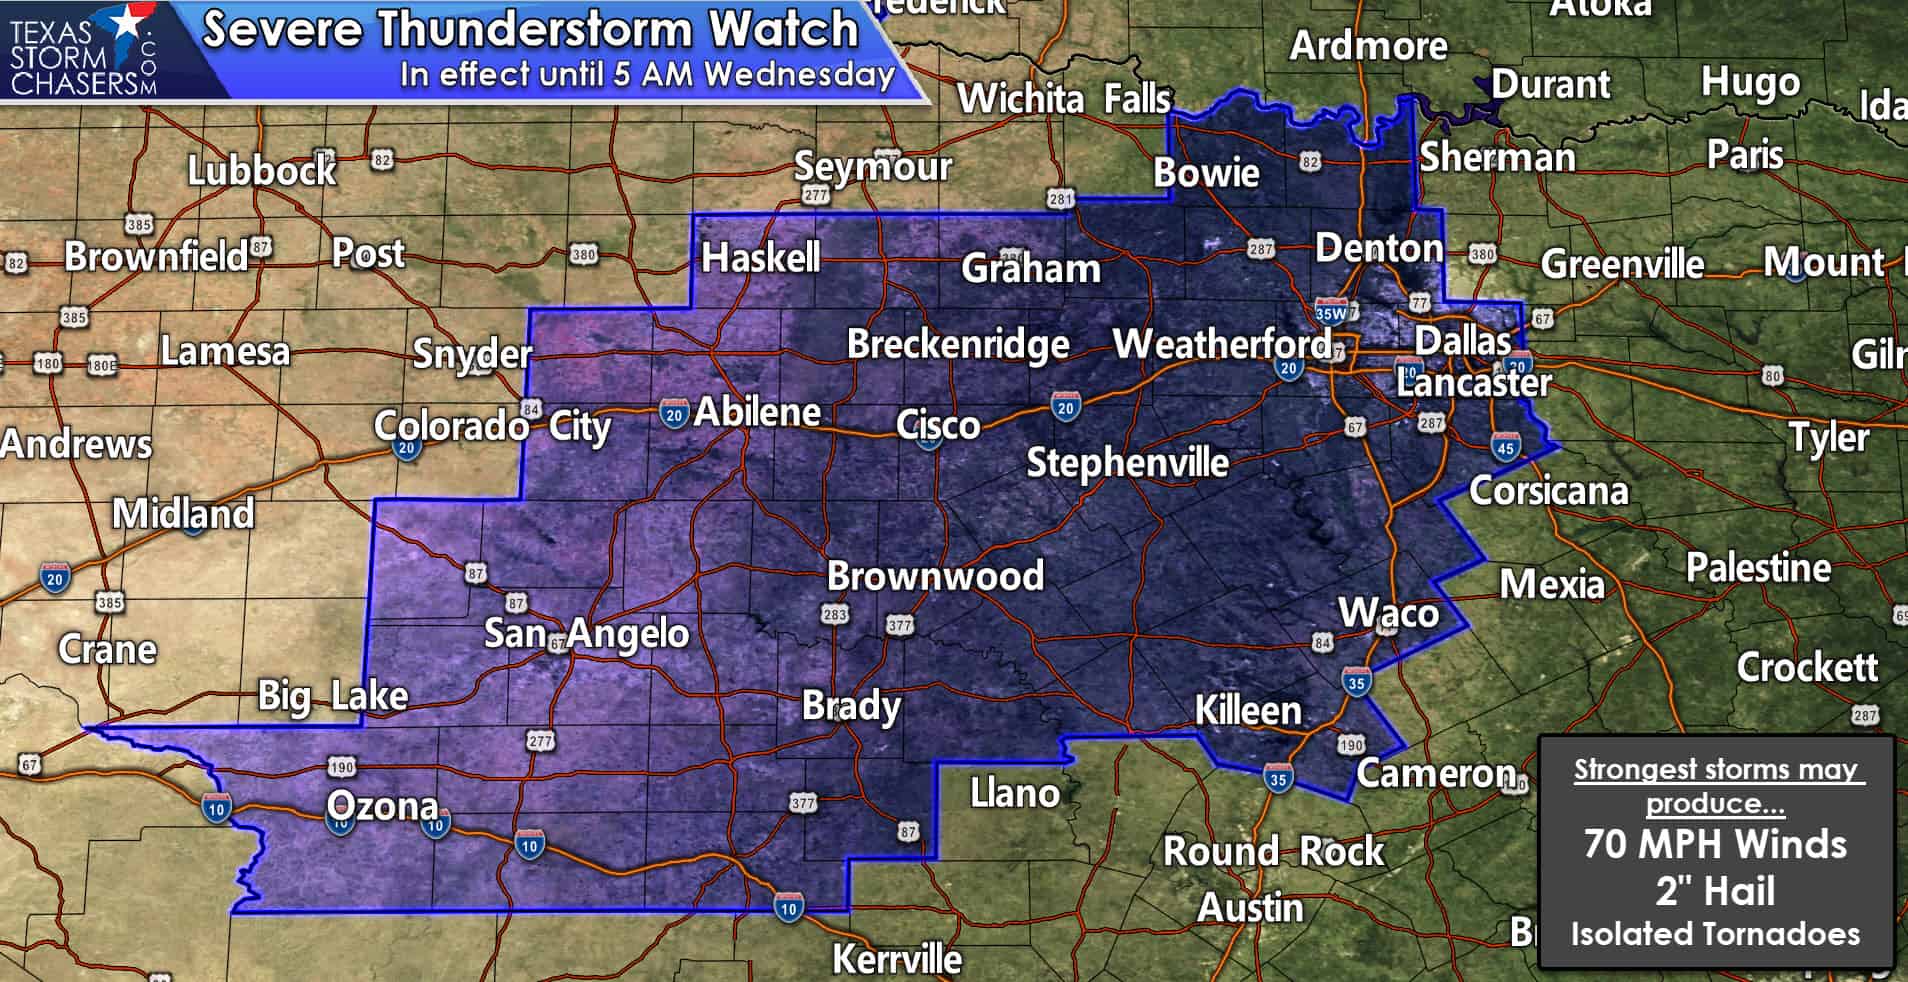 Severe Thunderstorm Watch ’till 5 AM for North Texas (I-35 and west) into the Concho Valley